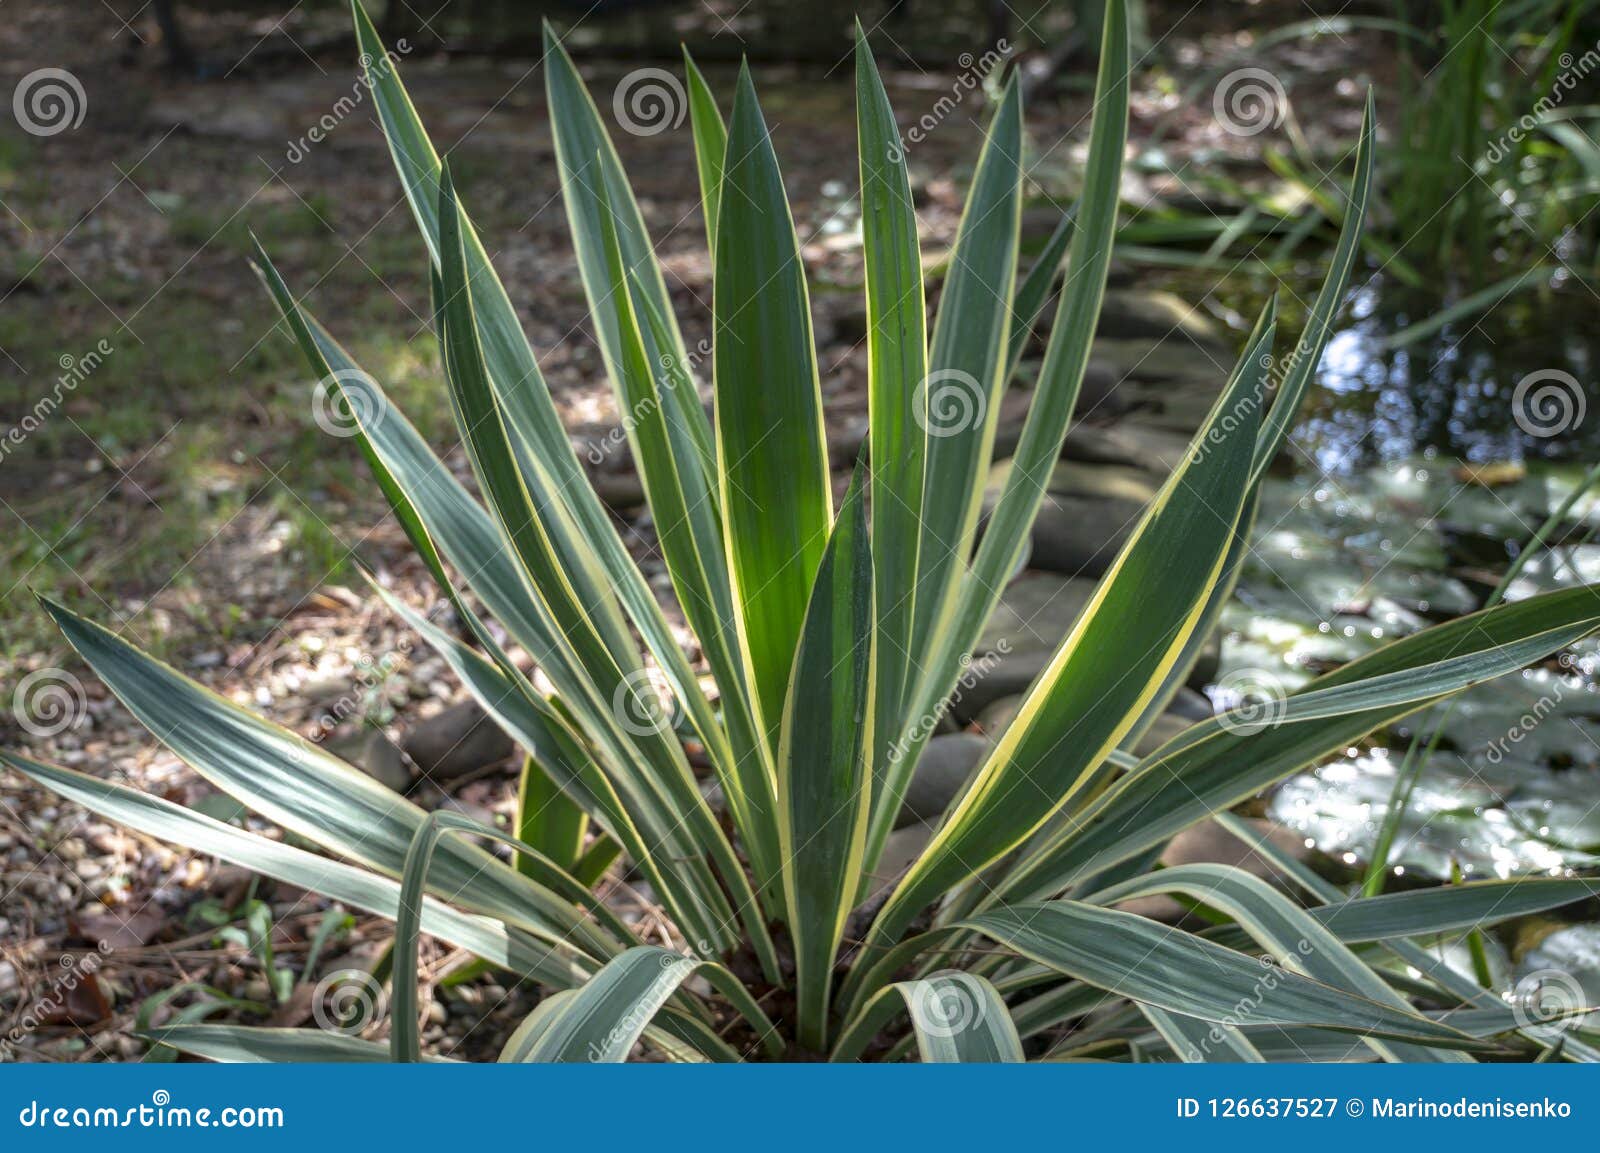 striped leaves yucca gloriosa in the natural light of the garden.